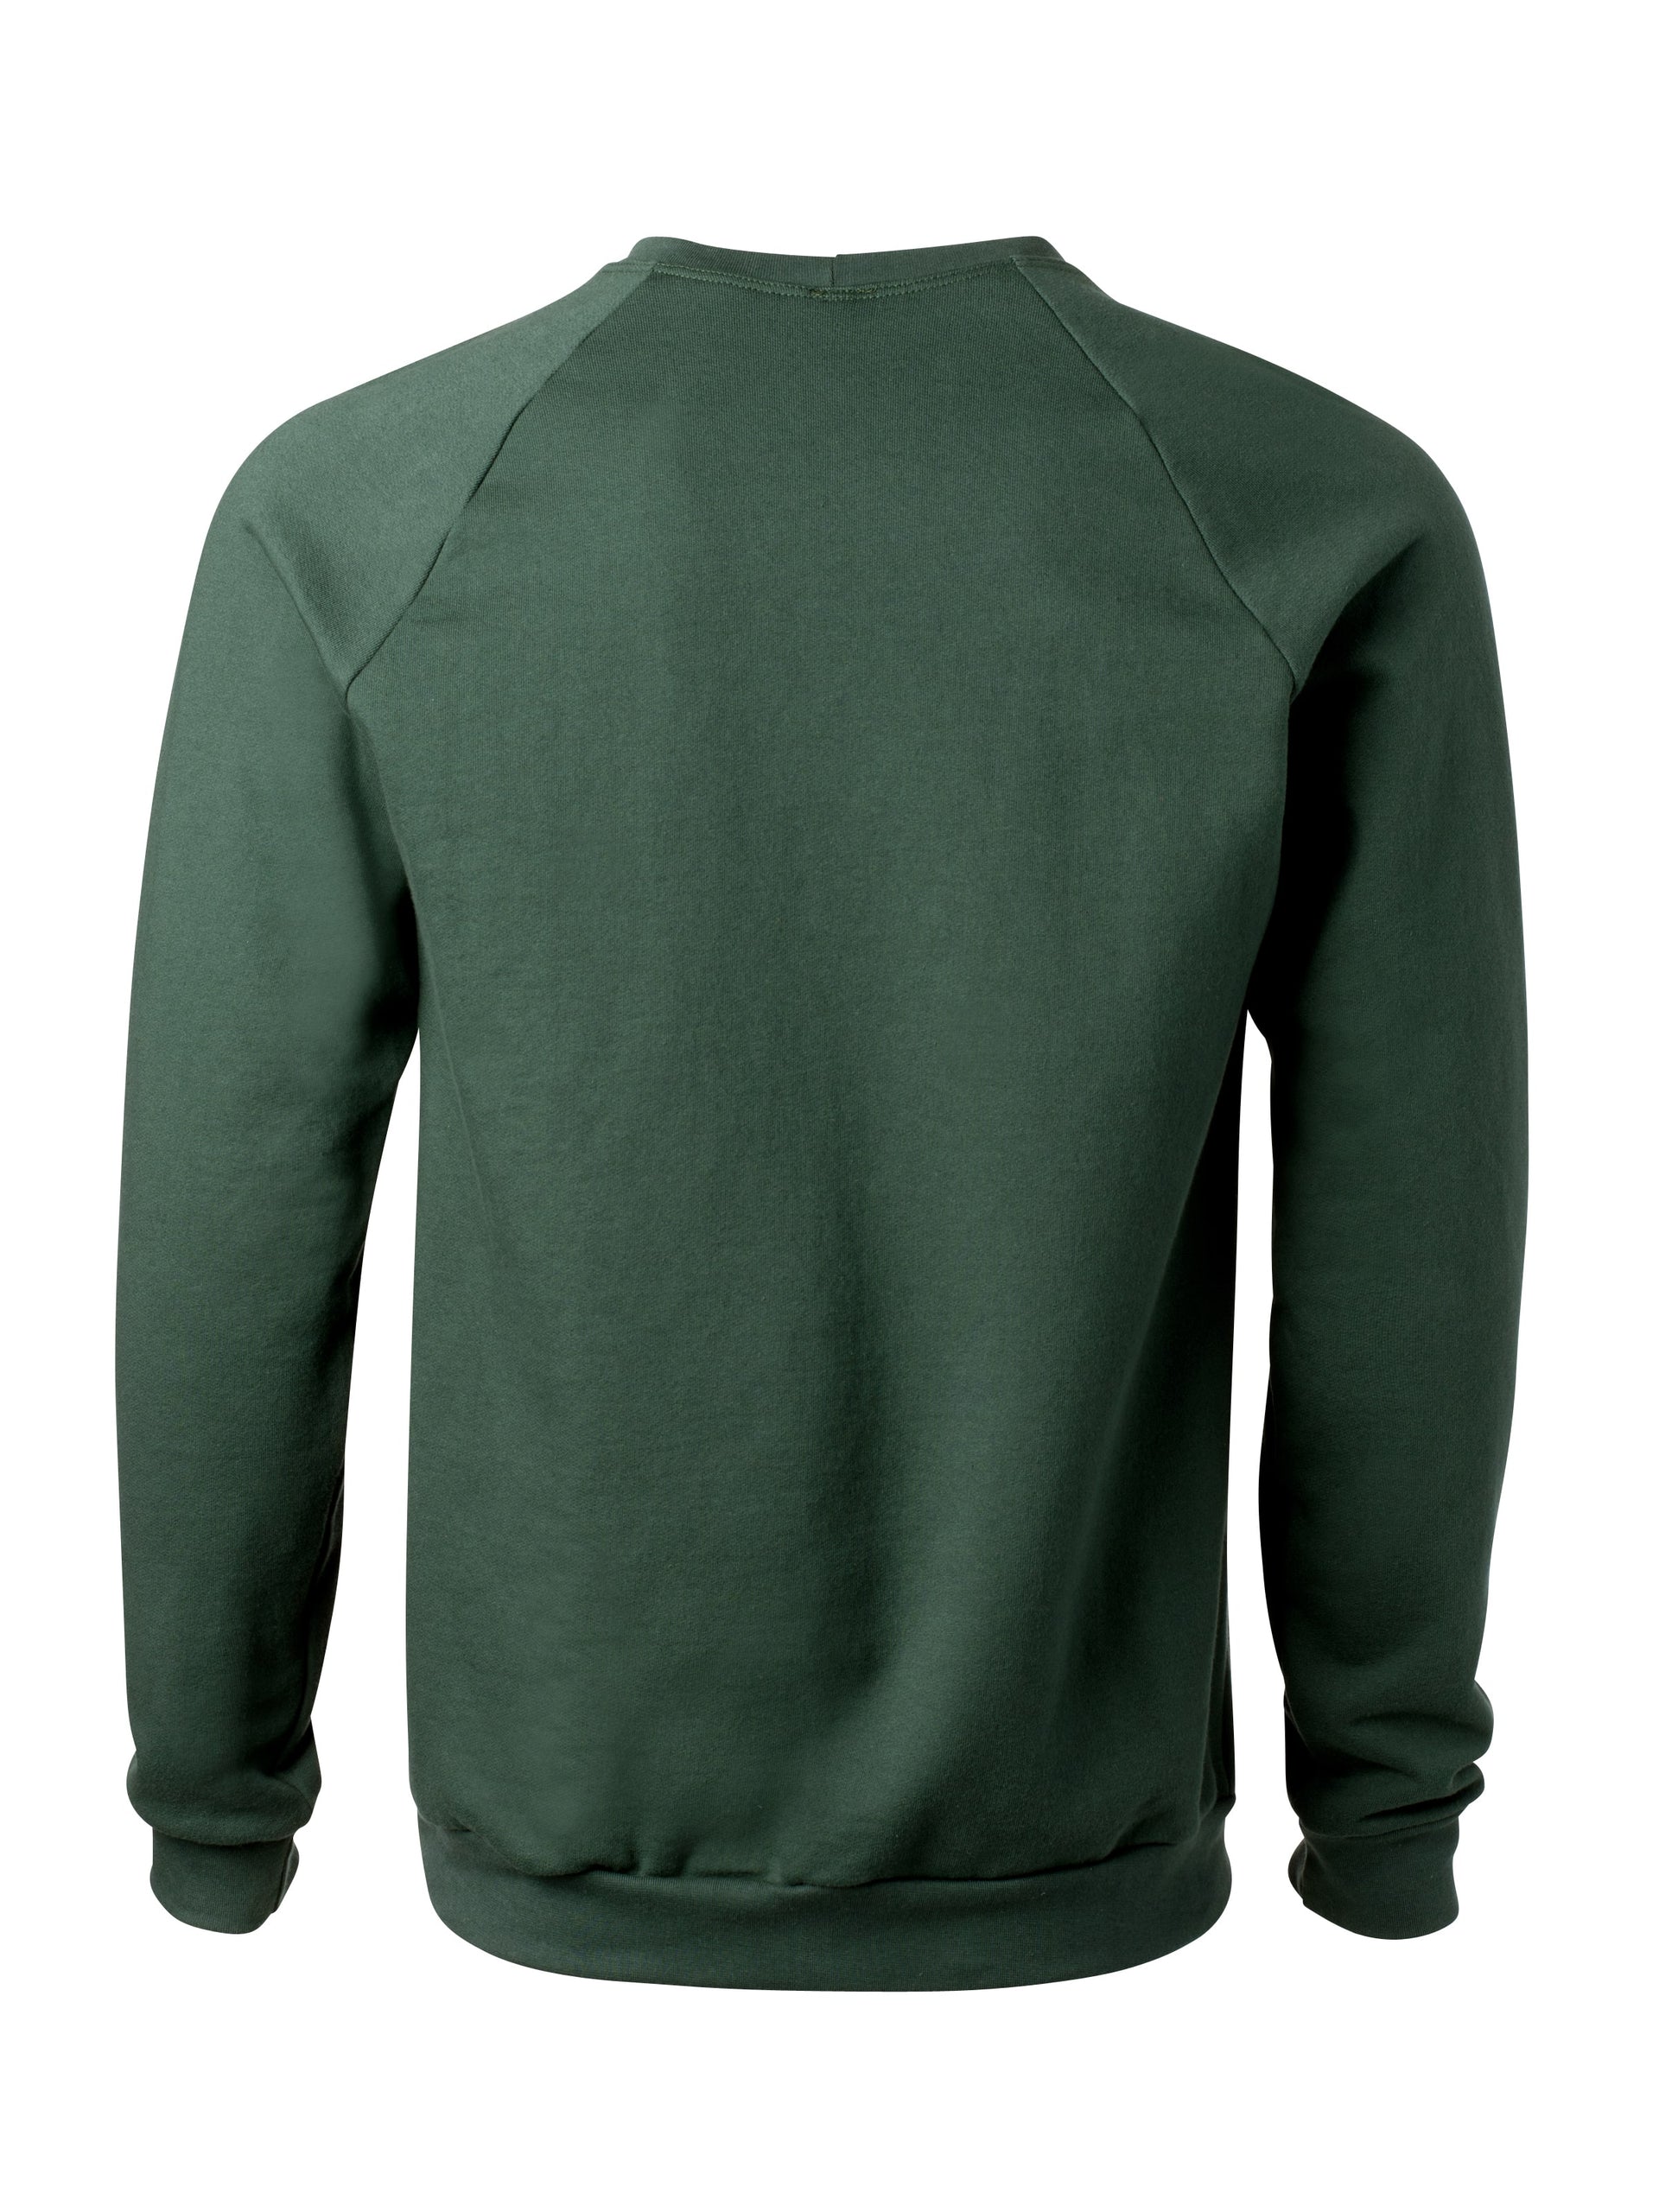 Pull-FRENCHY-coton ouate bio-Vert-Unisexe-ghost homme dos-FC07